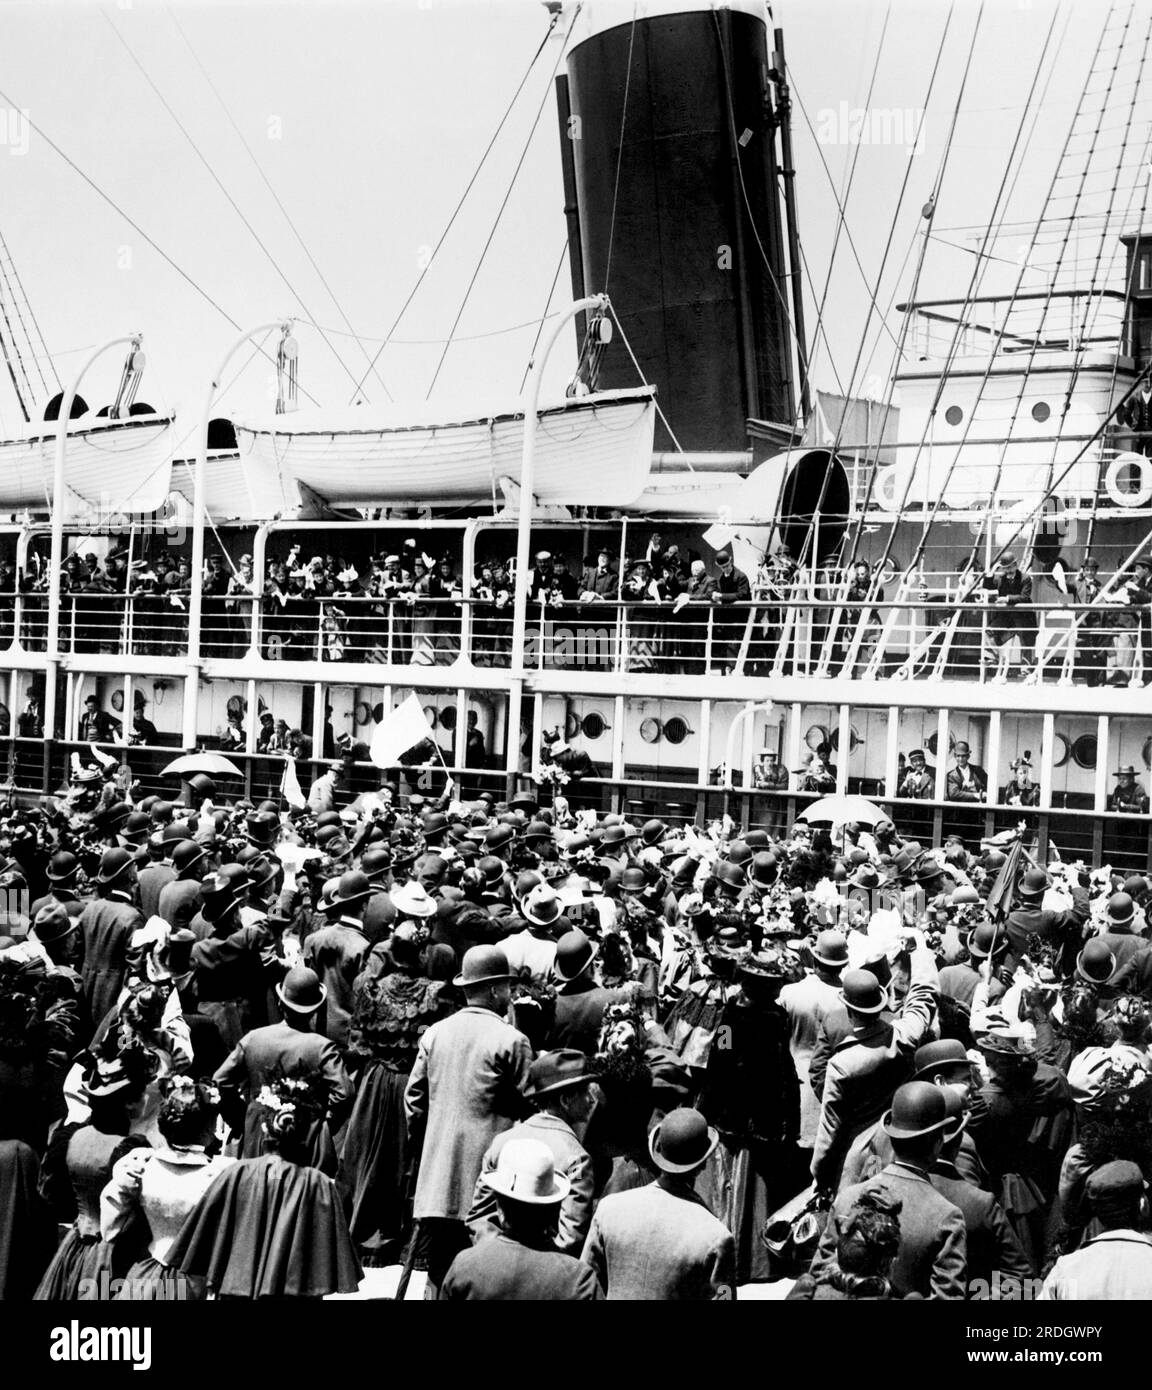 New York, New York: c. 1900 Spectators crowd the dock as a passenger ship prepares to leave for Europe. Stock Photo